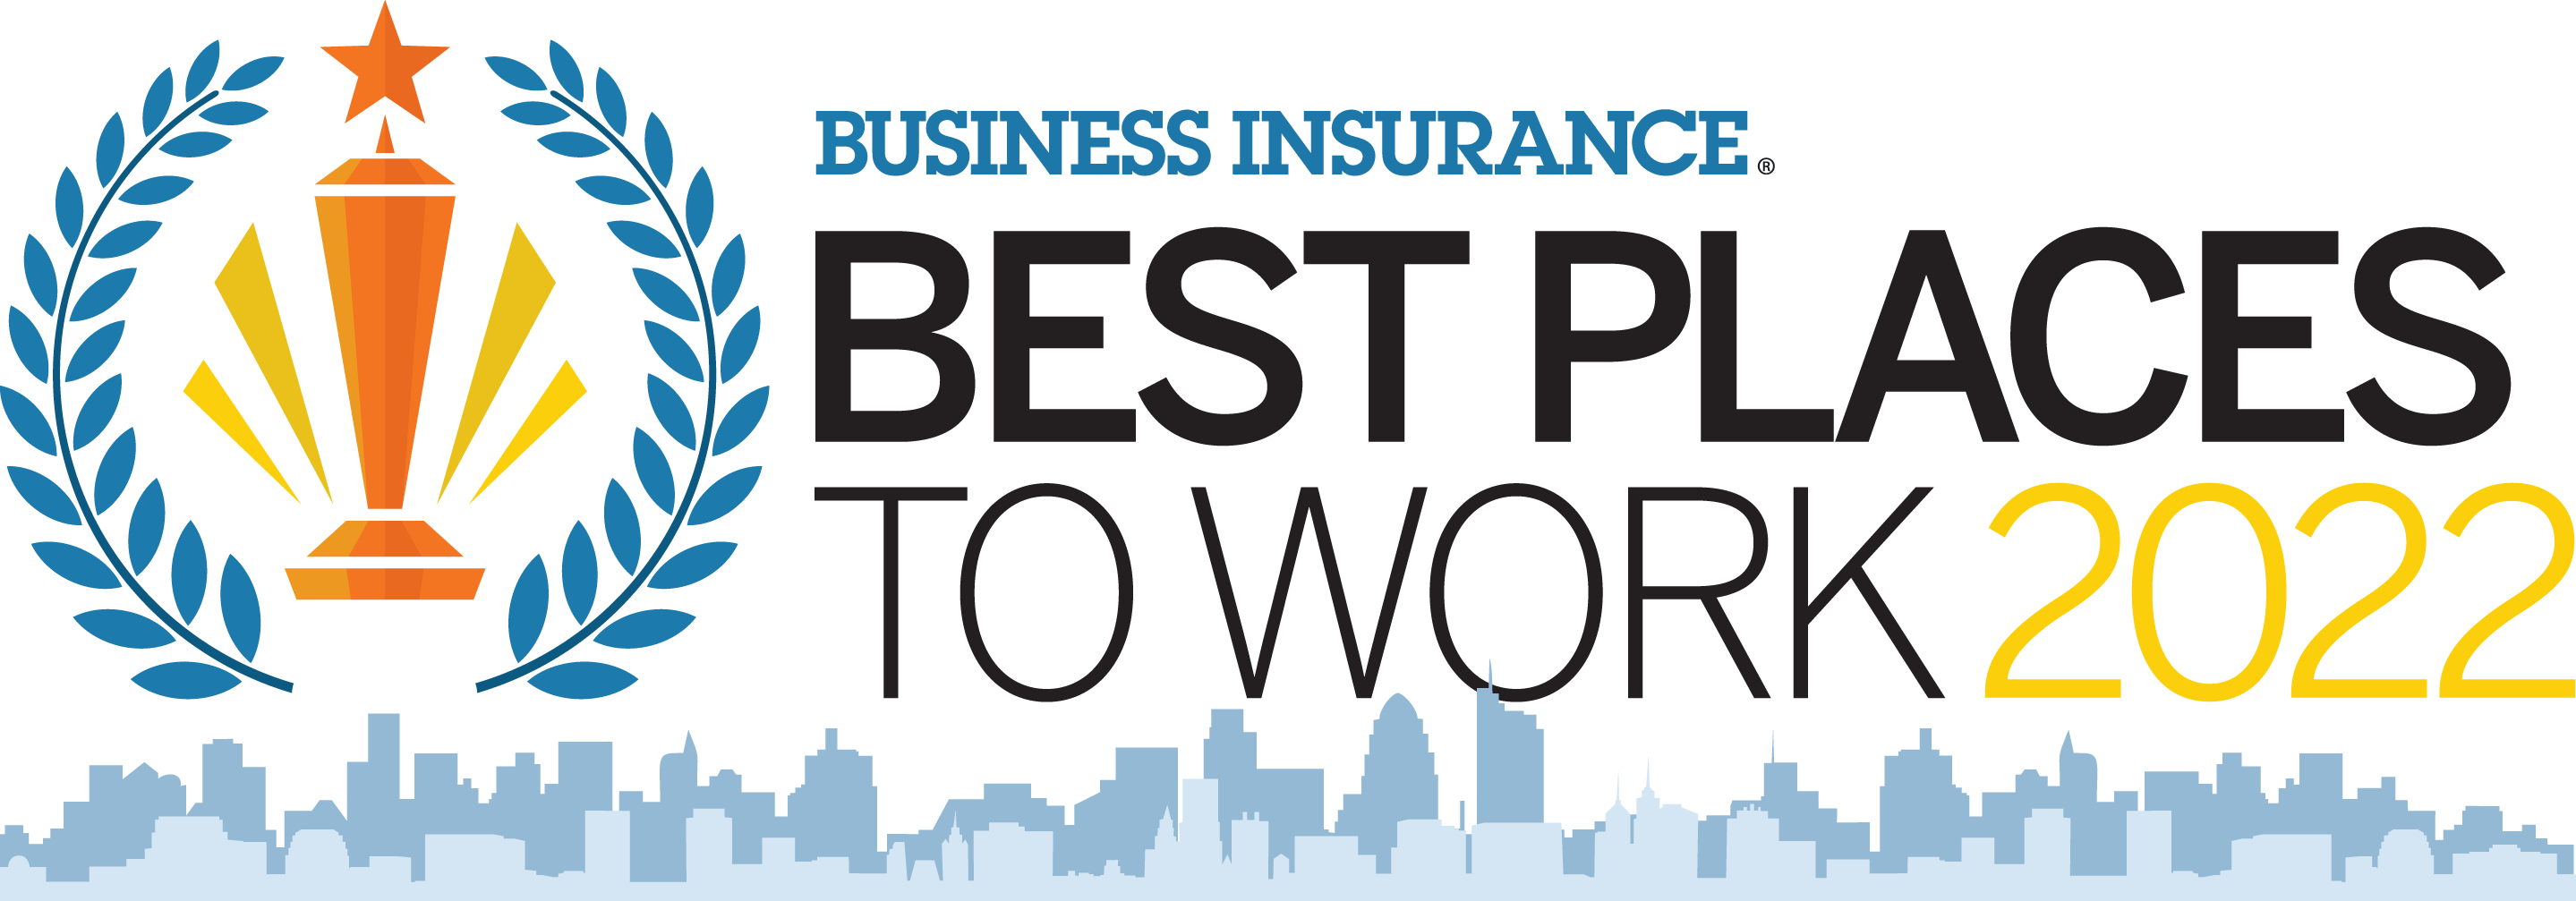 business insurance best places to work 2022 prime insurance company